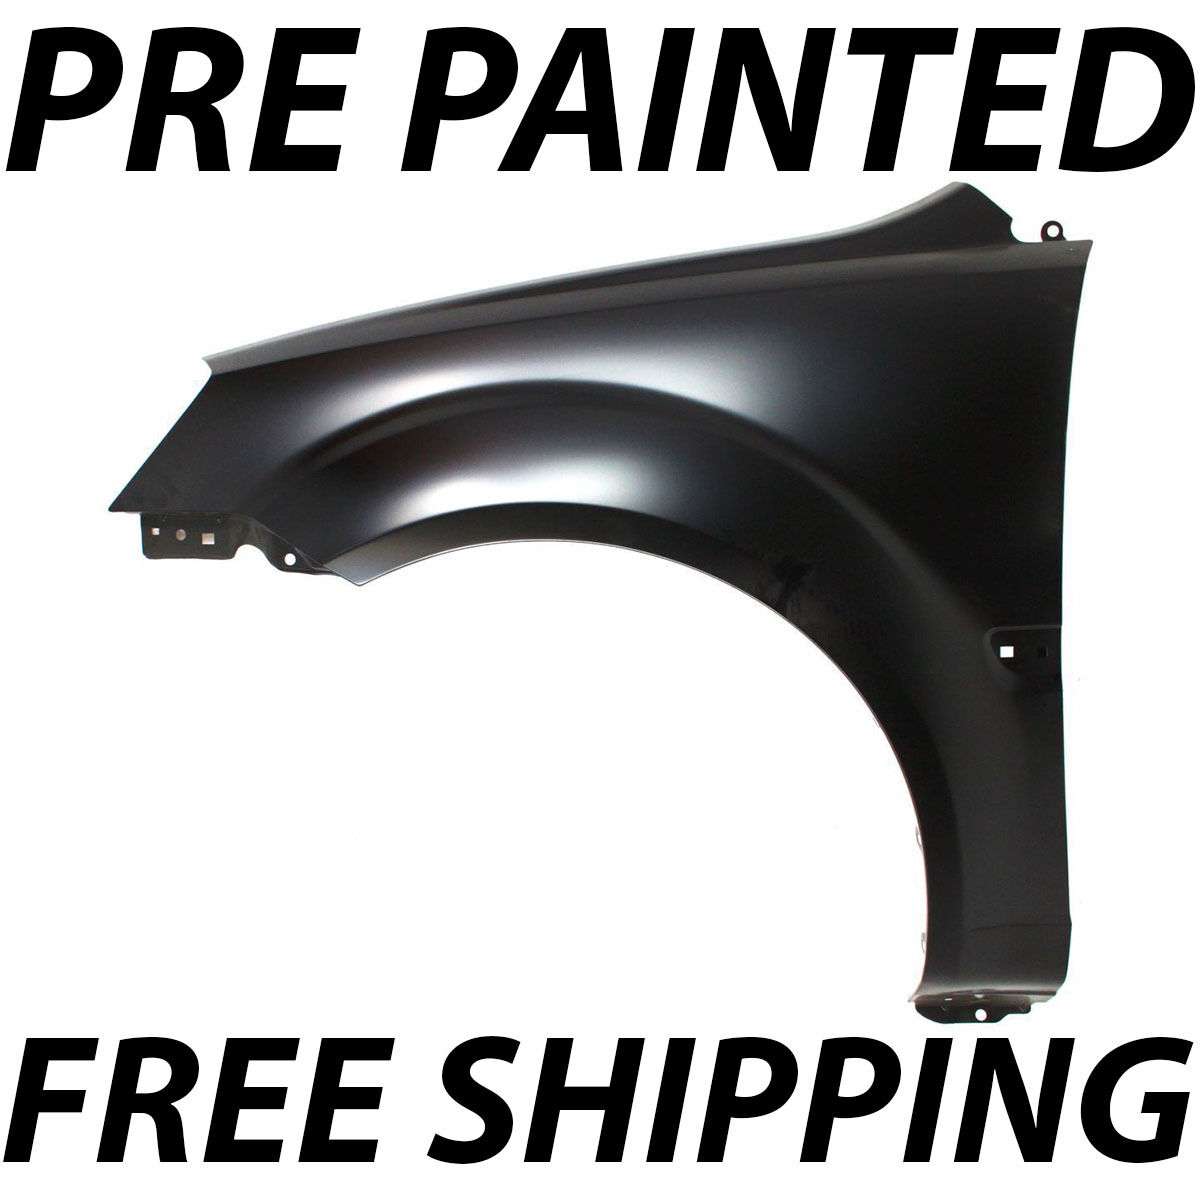 NEW Painted To Match - Drivers Front Left LH Fender For 2006-2011 Kia Rio Rio5